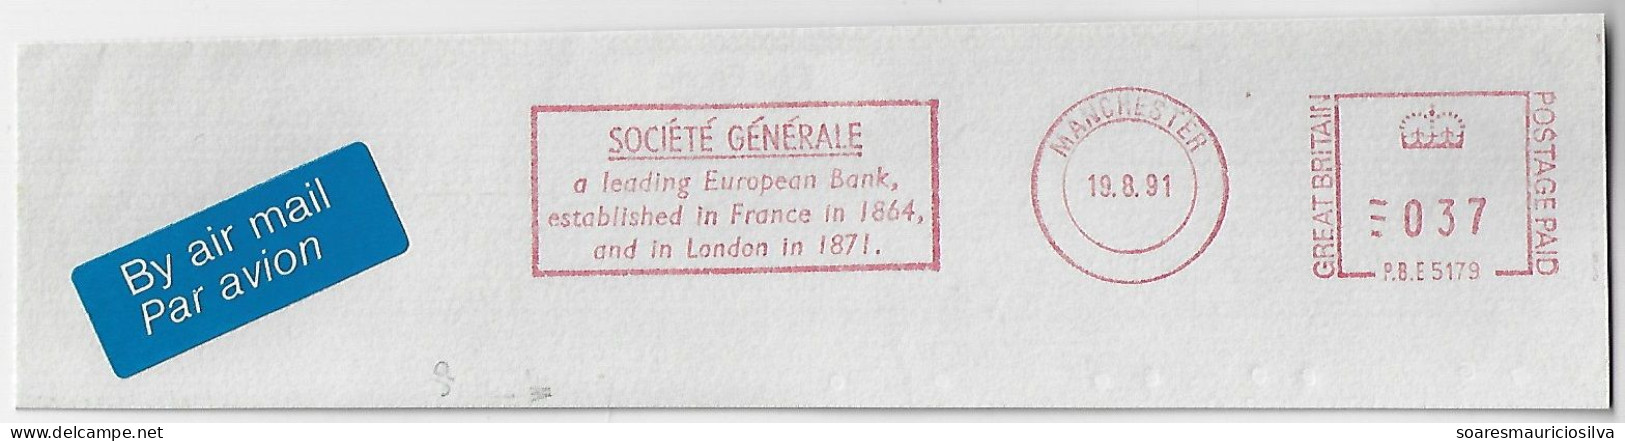 Great Britain 1991 Meter Stamp Pitney Bowes 5000 Series With Slogan By Société Générale Bank In Manchester - Cartas & Documentos